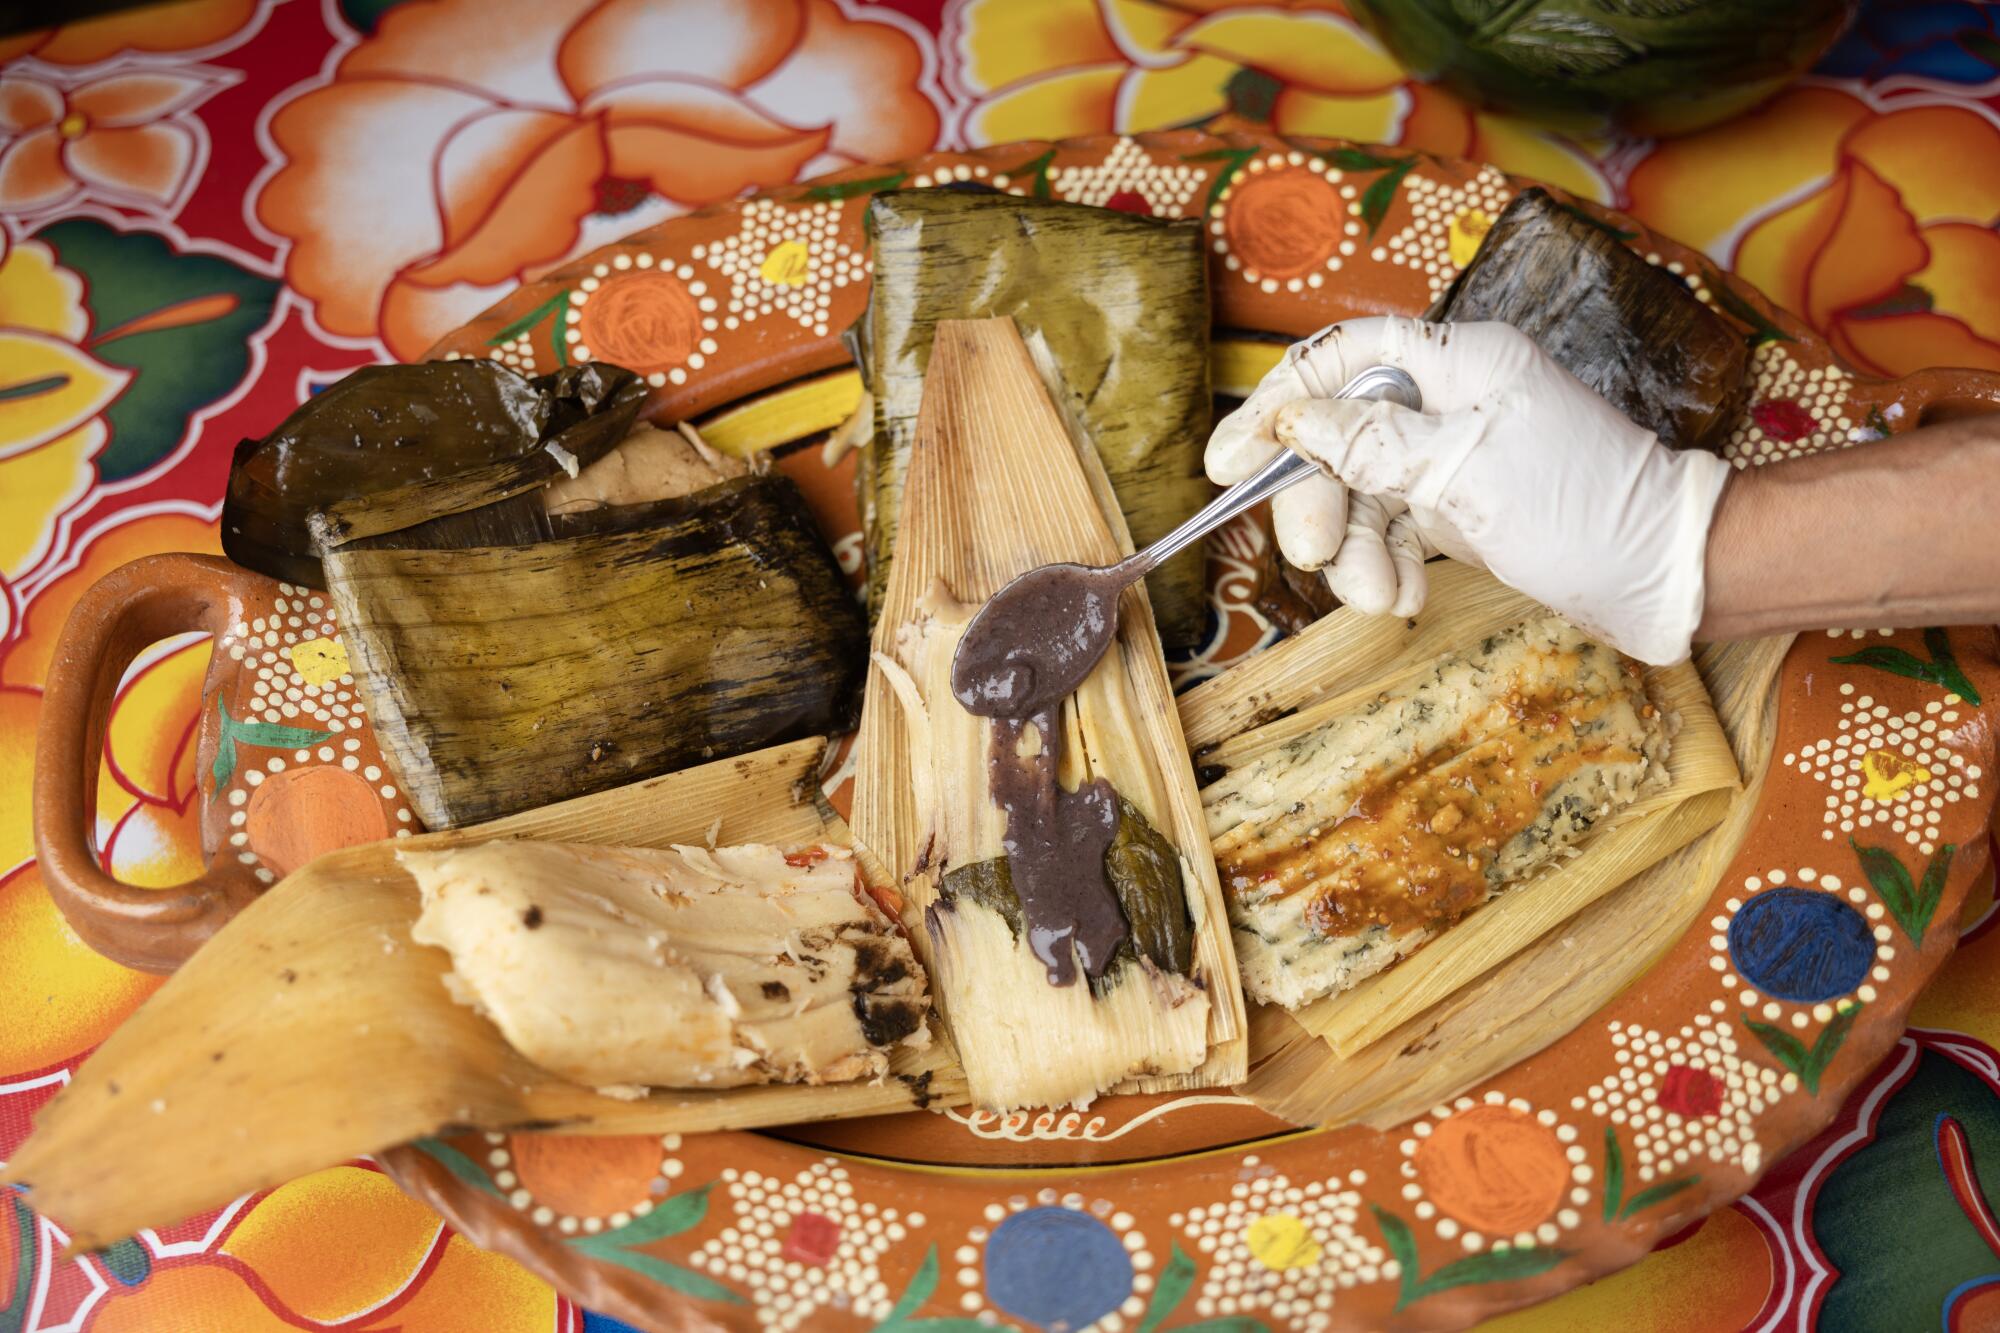 A plate of tamales gets a spoonful of sauce at Sabores Oaxaqueños Restaurant in Koreatown.